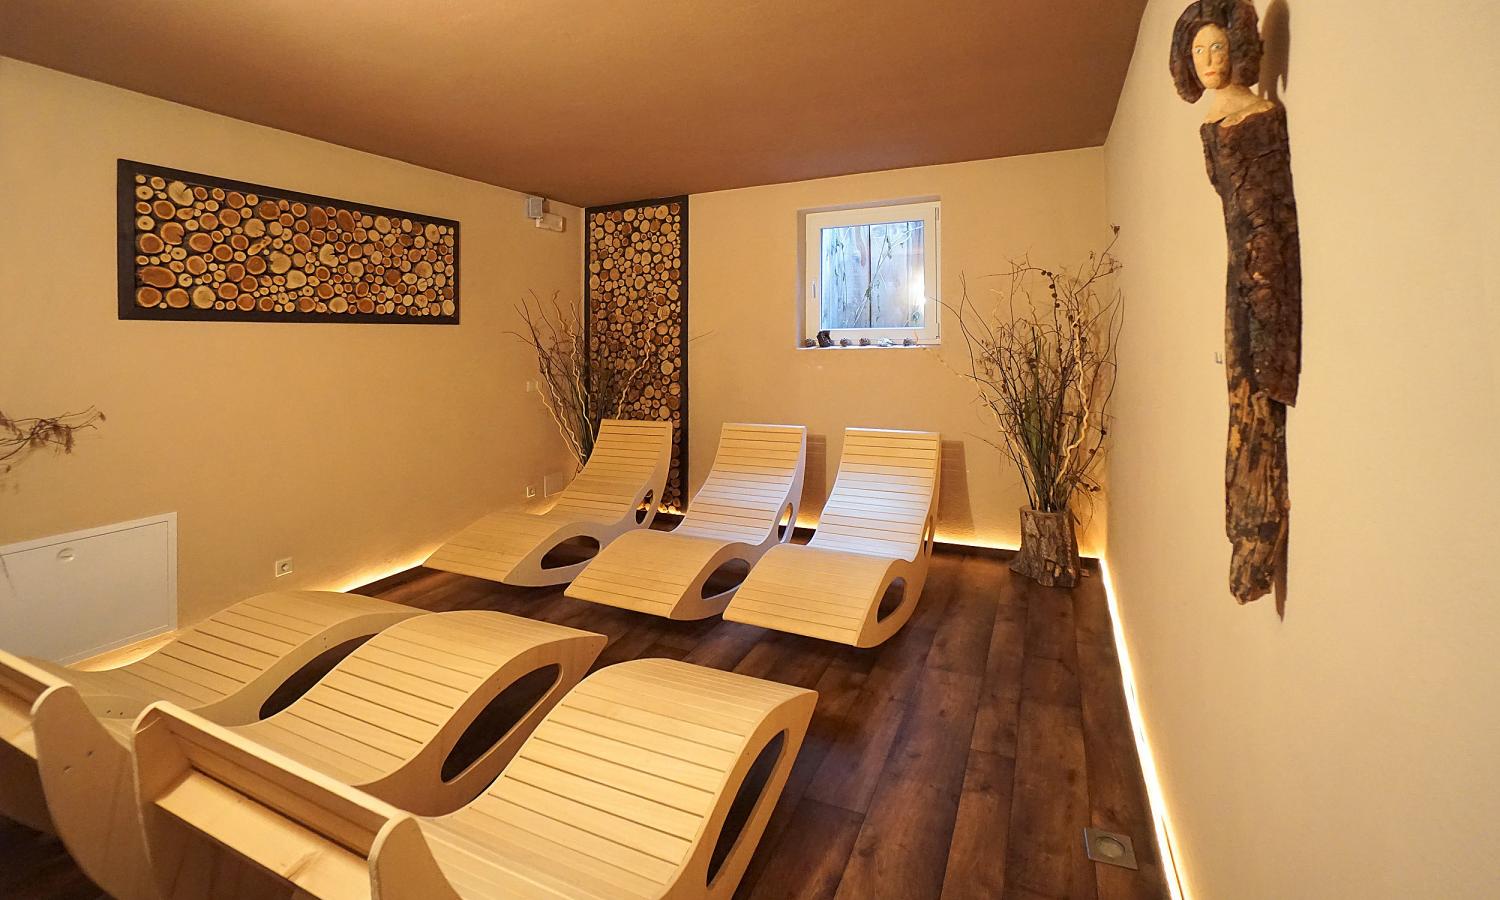 Relaxation room with loungers